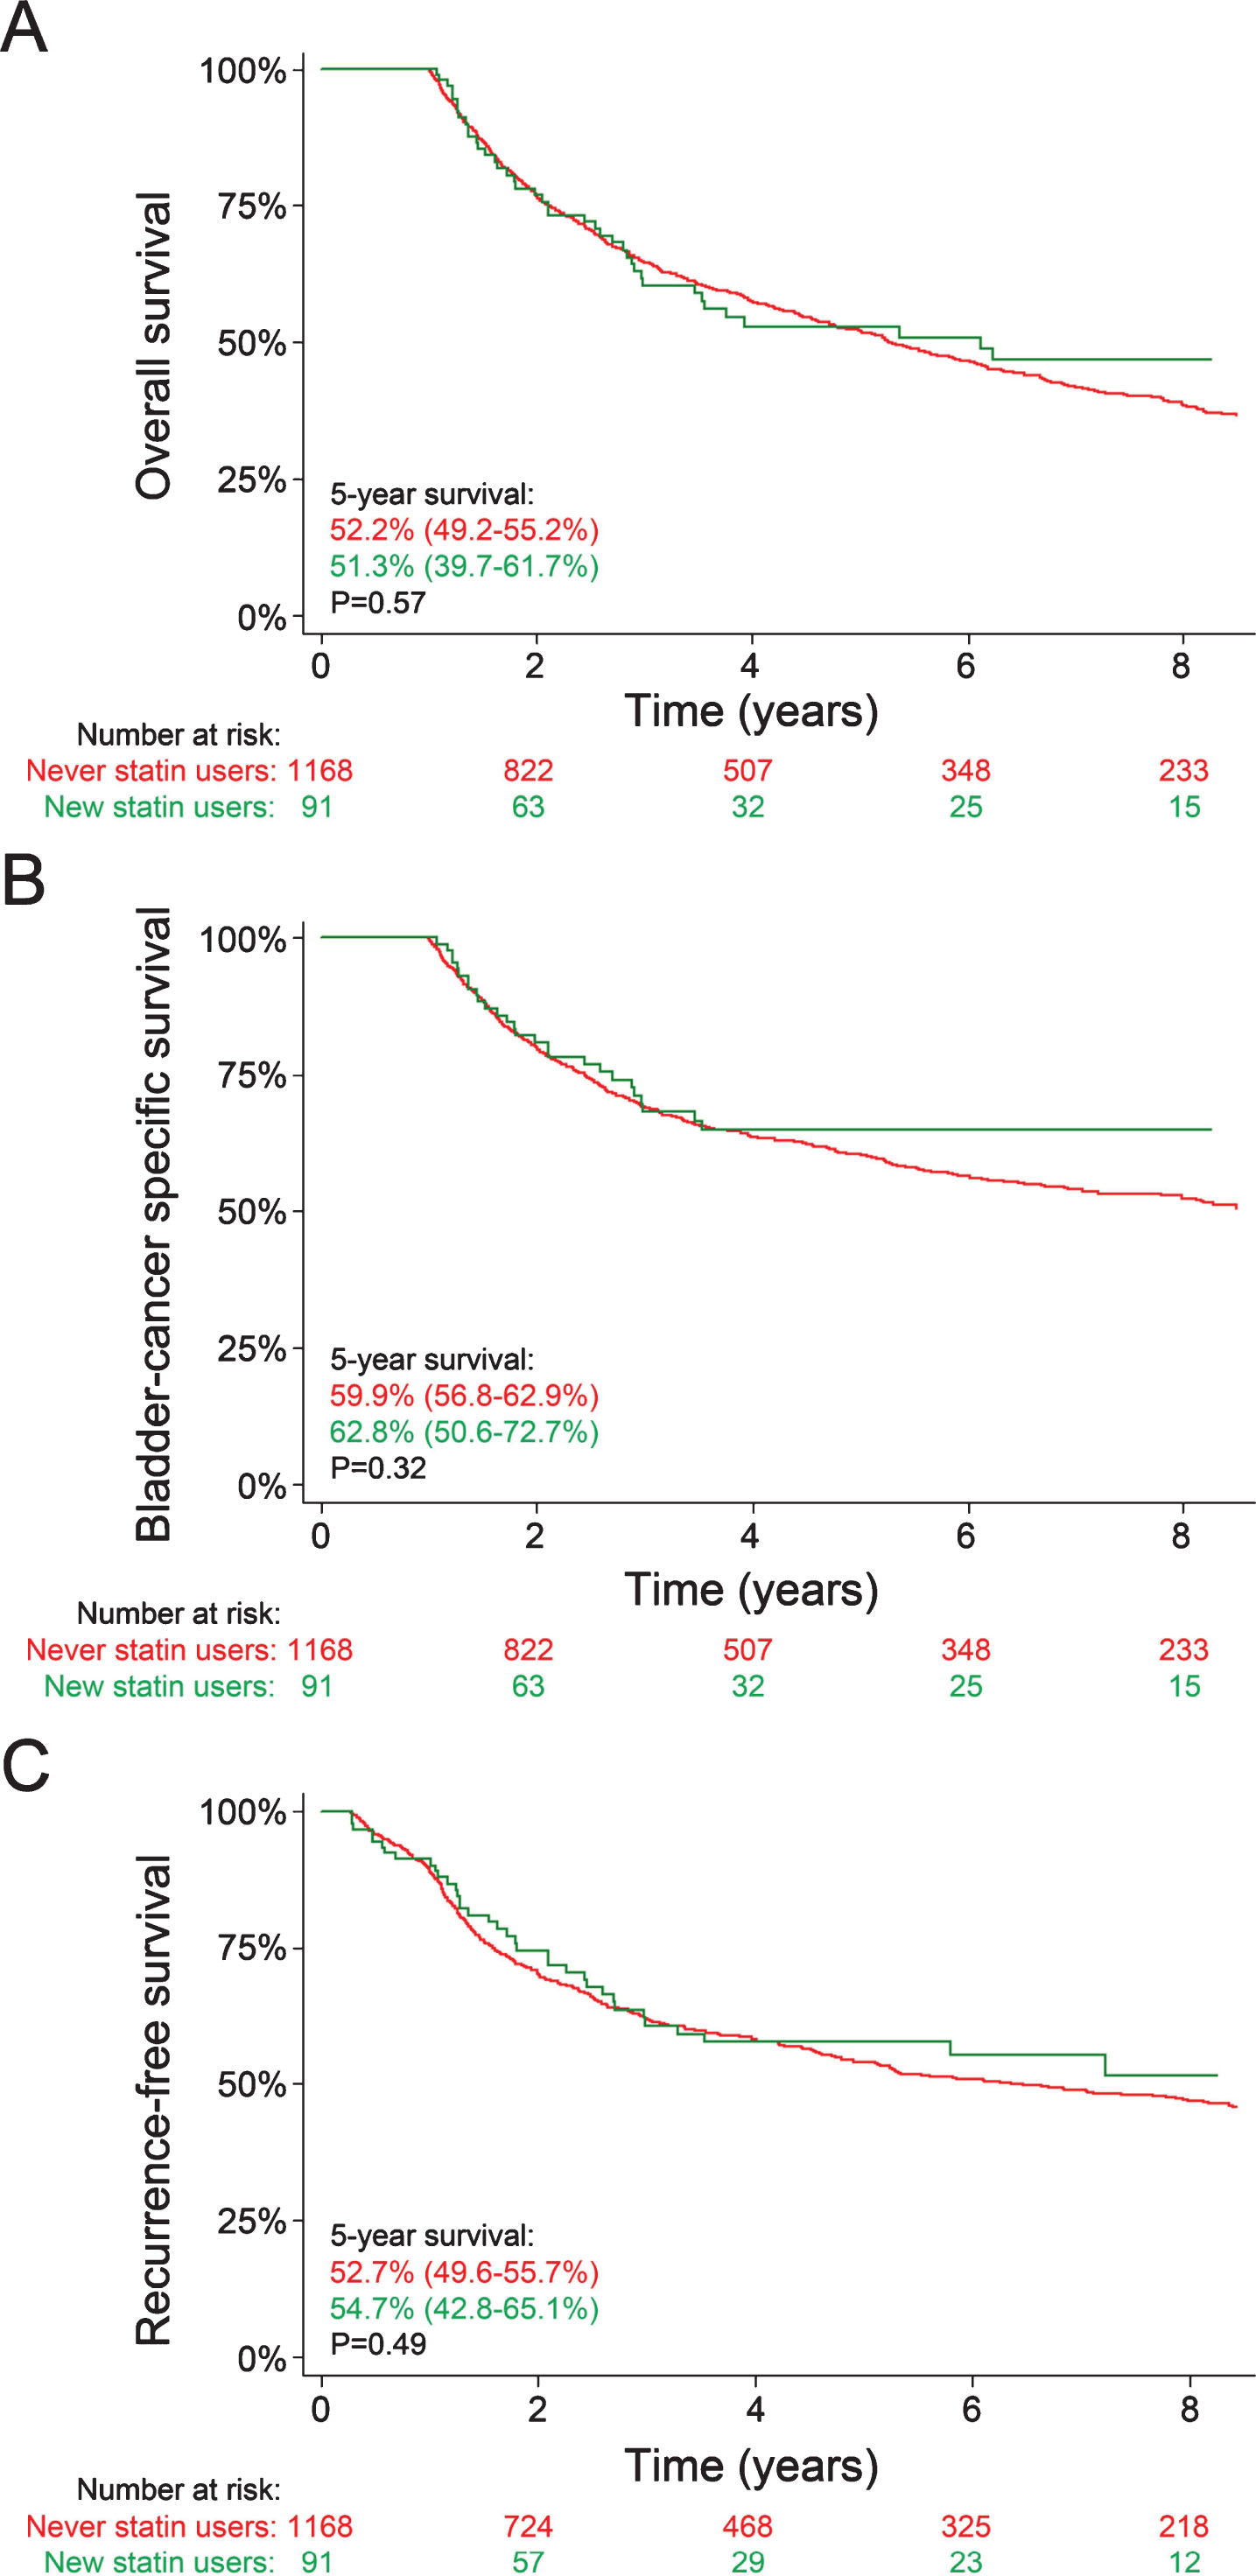 Overall survival (A), bladder cancer-specific survival (B), and time to recurrence (C) in patients who started statins in the year following surgery (green line) and never statin users (red line) who survived at least one year post-surgery. Values depict five-year survival rates with their respective 95% confidence intervals. P-values were calculated using log-rank tests.